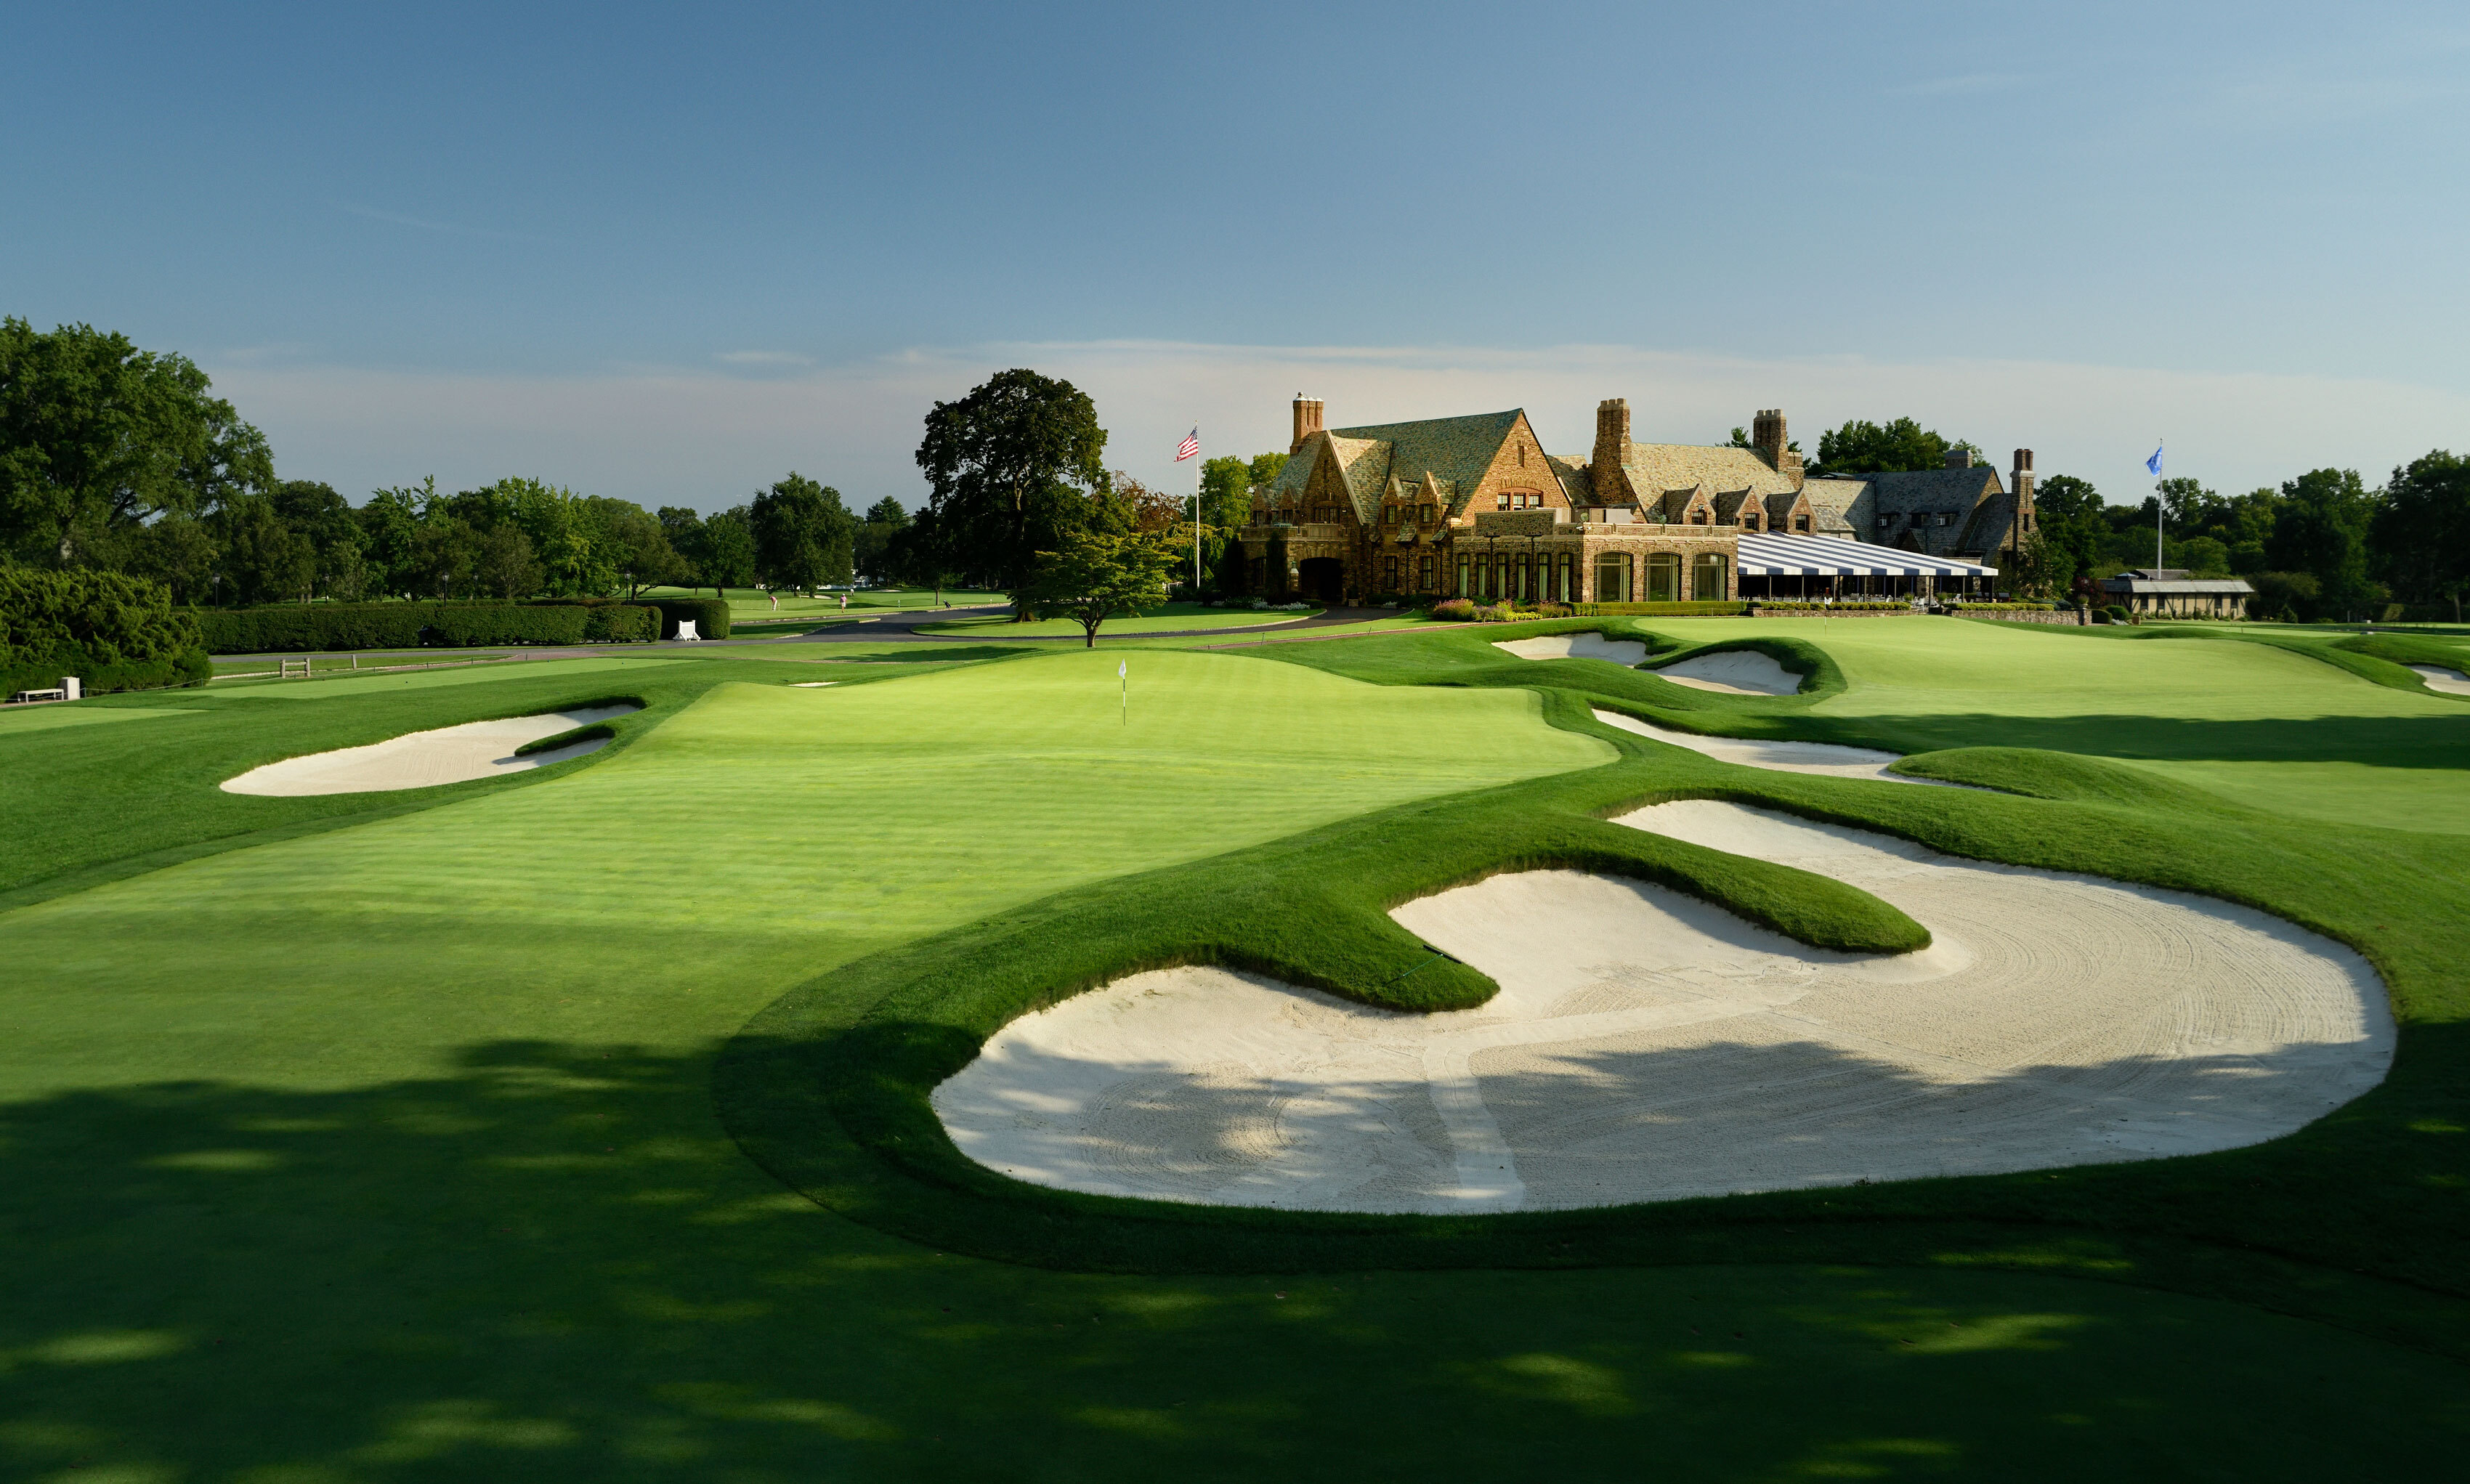 Pine Valley picked to host 2034 Curtis Cup Match - Golf Course Industry